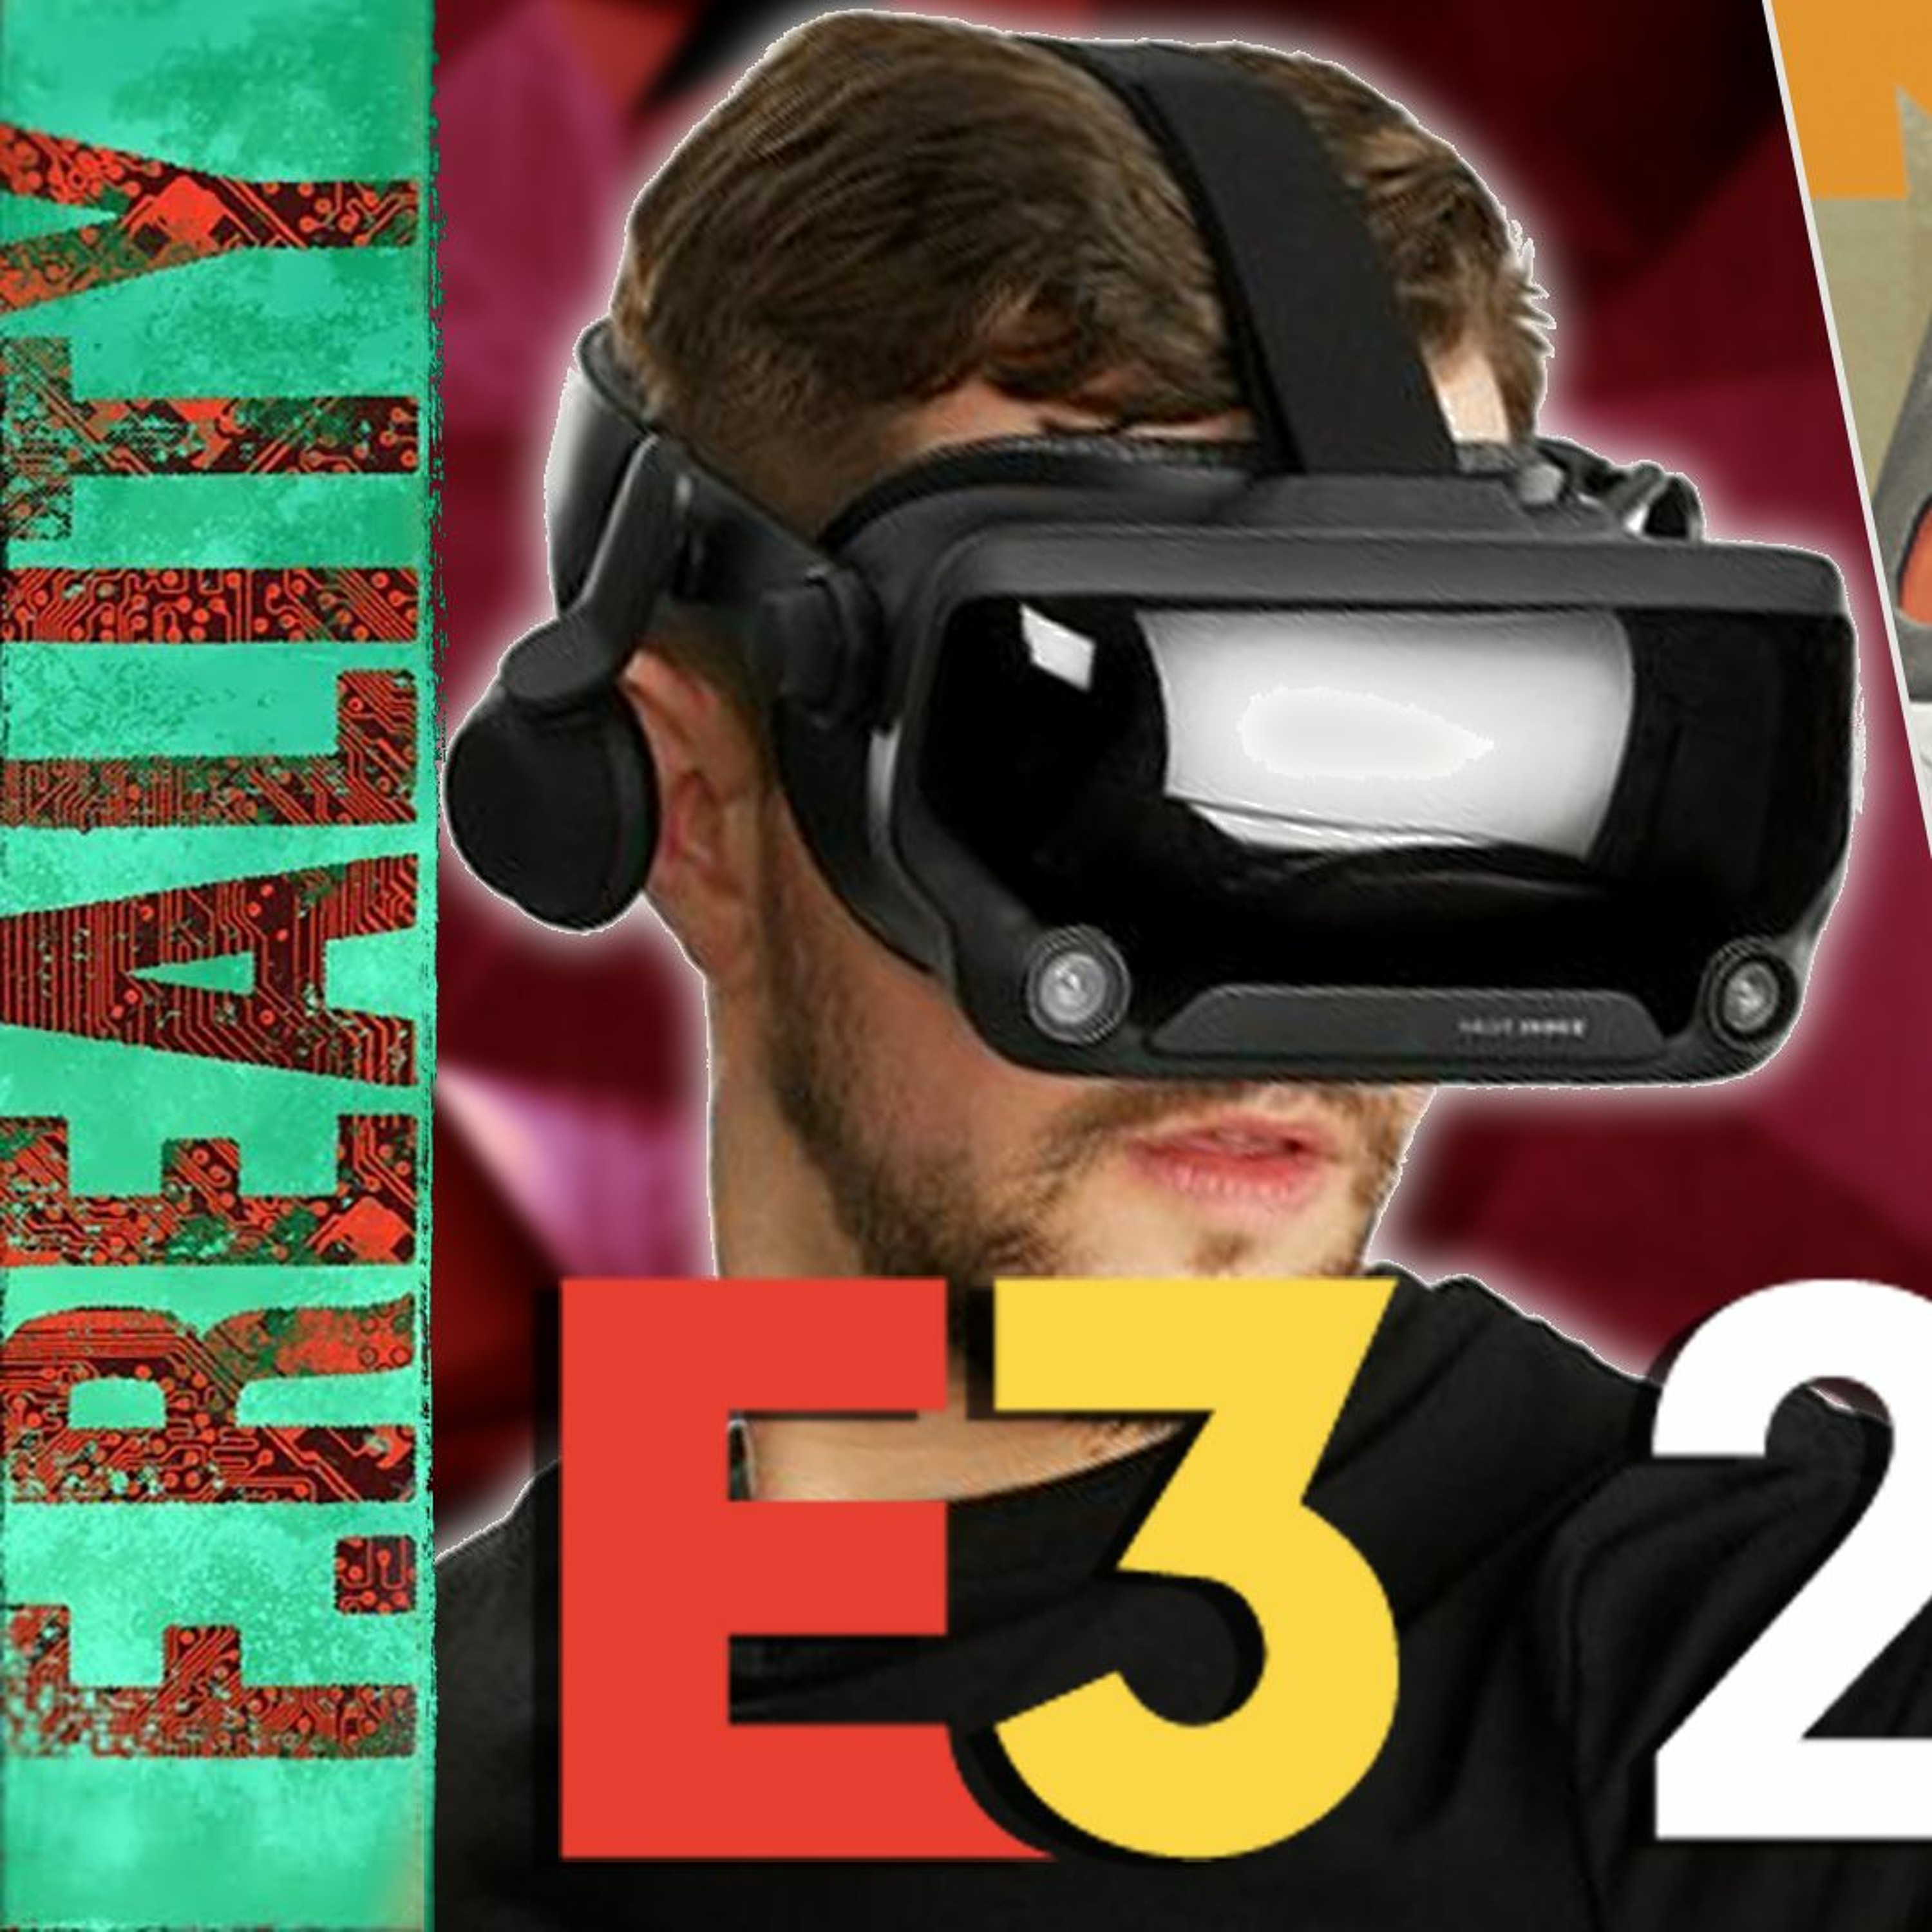 E3VR 2019 Special Episode - Espire One, Boneworks, Solaris, Meat Fortress And Much More Coming Soon